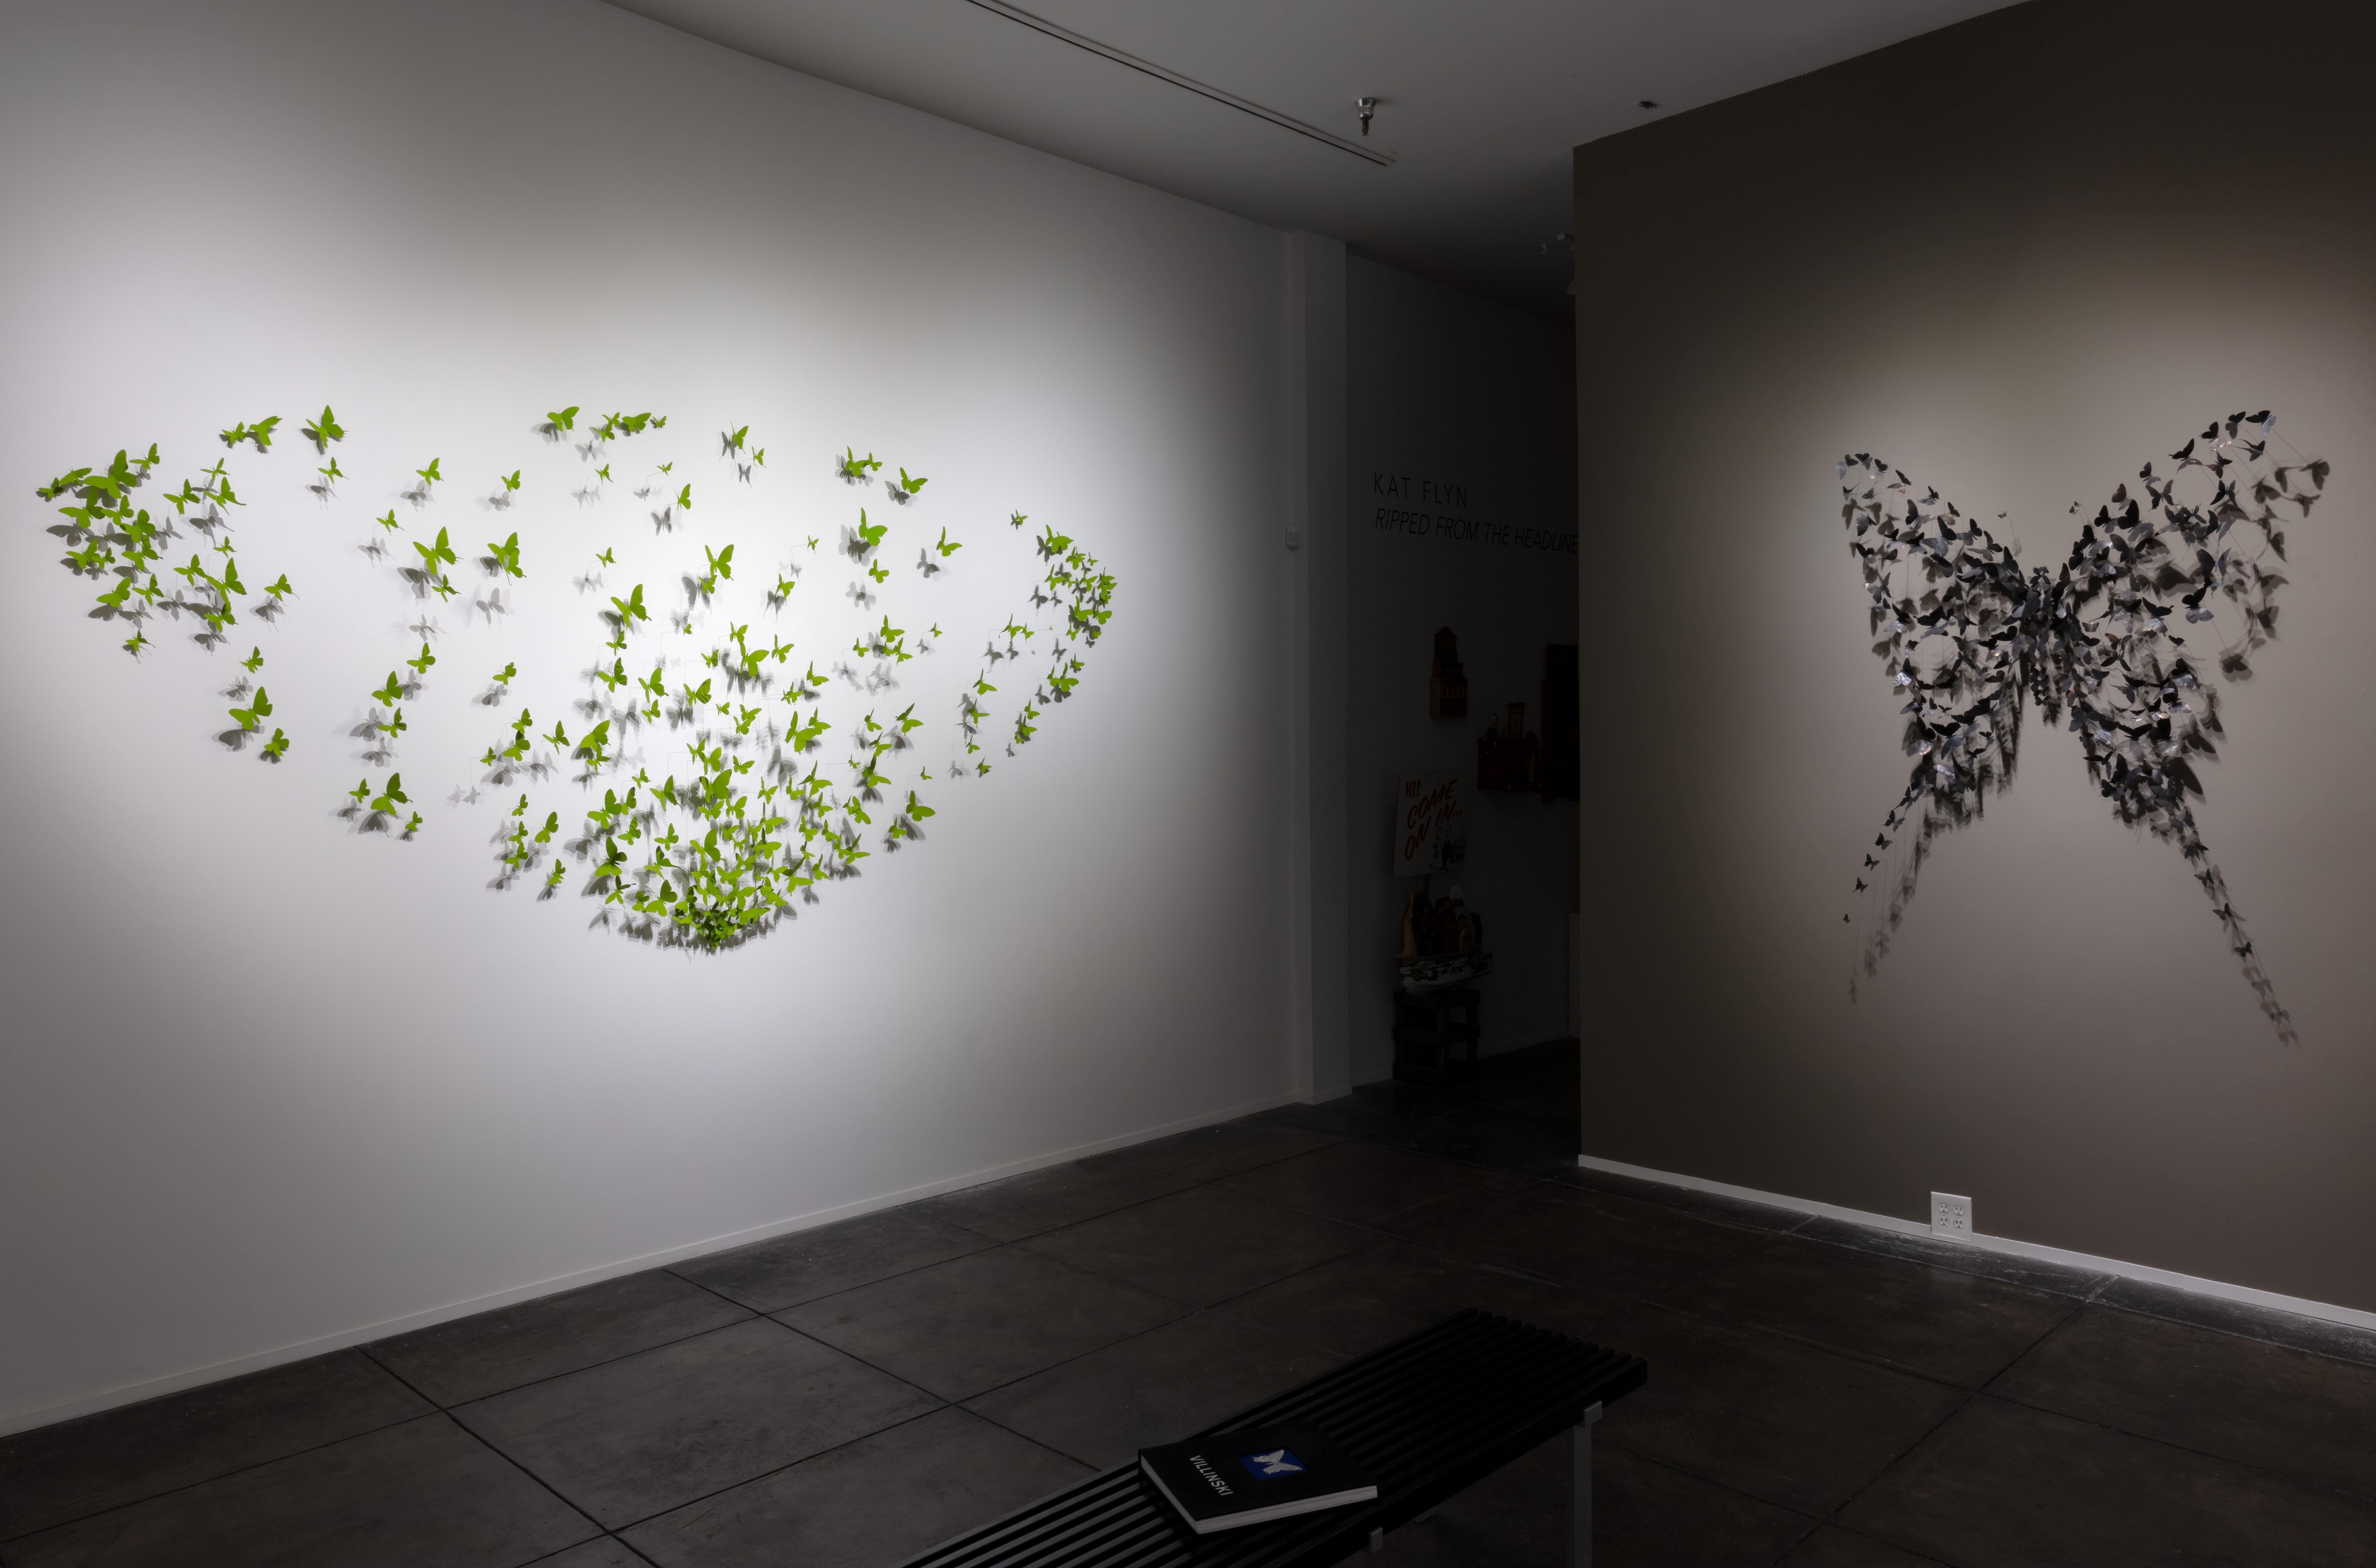 medium: found aluminum cans, wire, and soot

Available in multiple color options (inquire with gallery).
Installations are made to order, sizes and shapes of butterflies vary. 

Paul Villinski has created studio and large-scale artworks for more